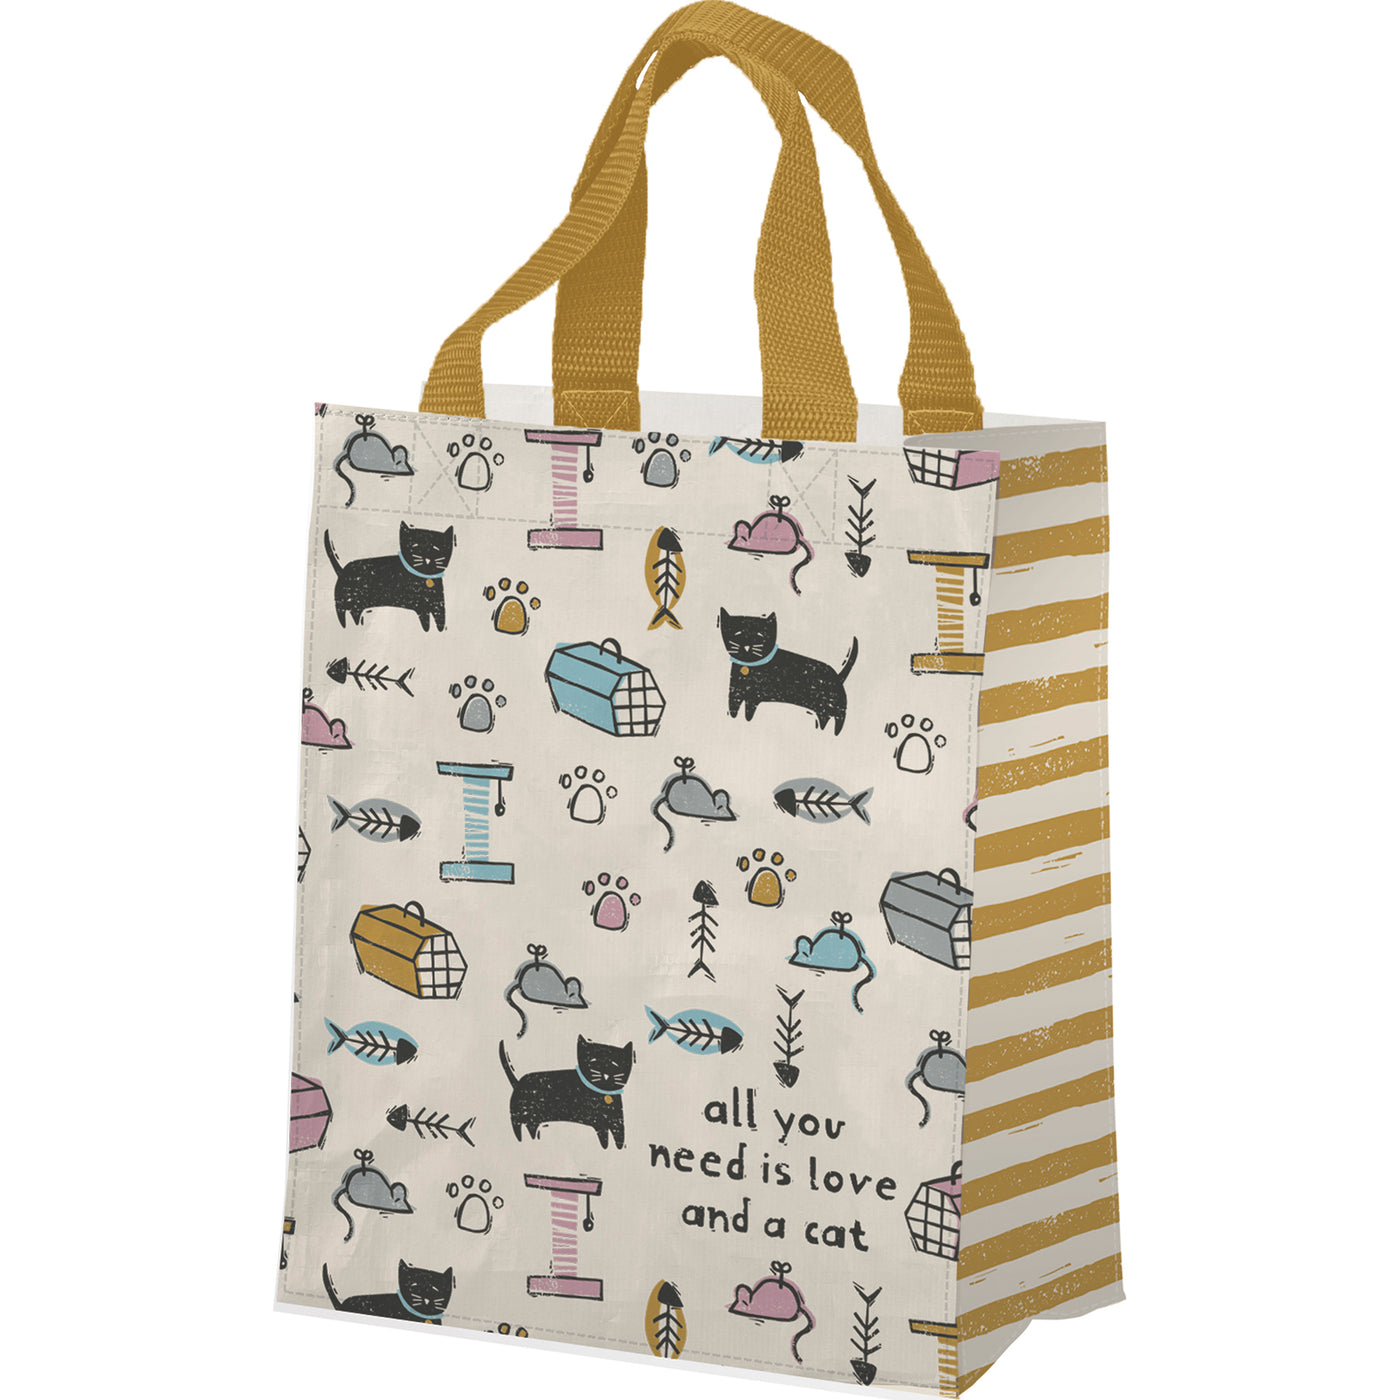 All You Need is Love and a Cat Small Market Tote Bag